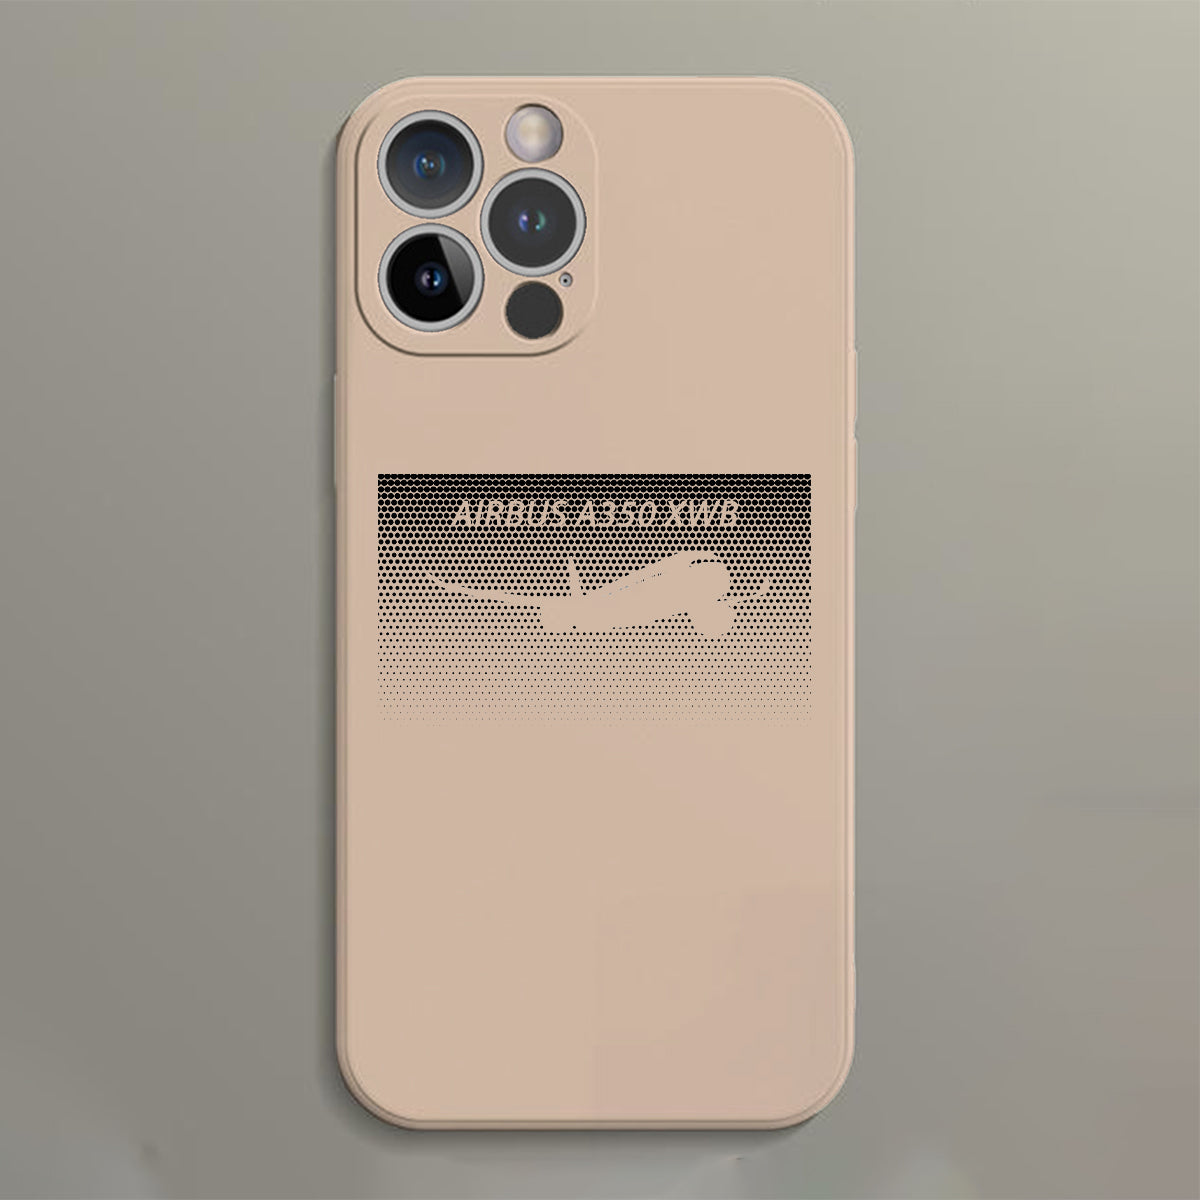 Airbus A350XWB & Dots Designed Soft Silicone iPhone Cases